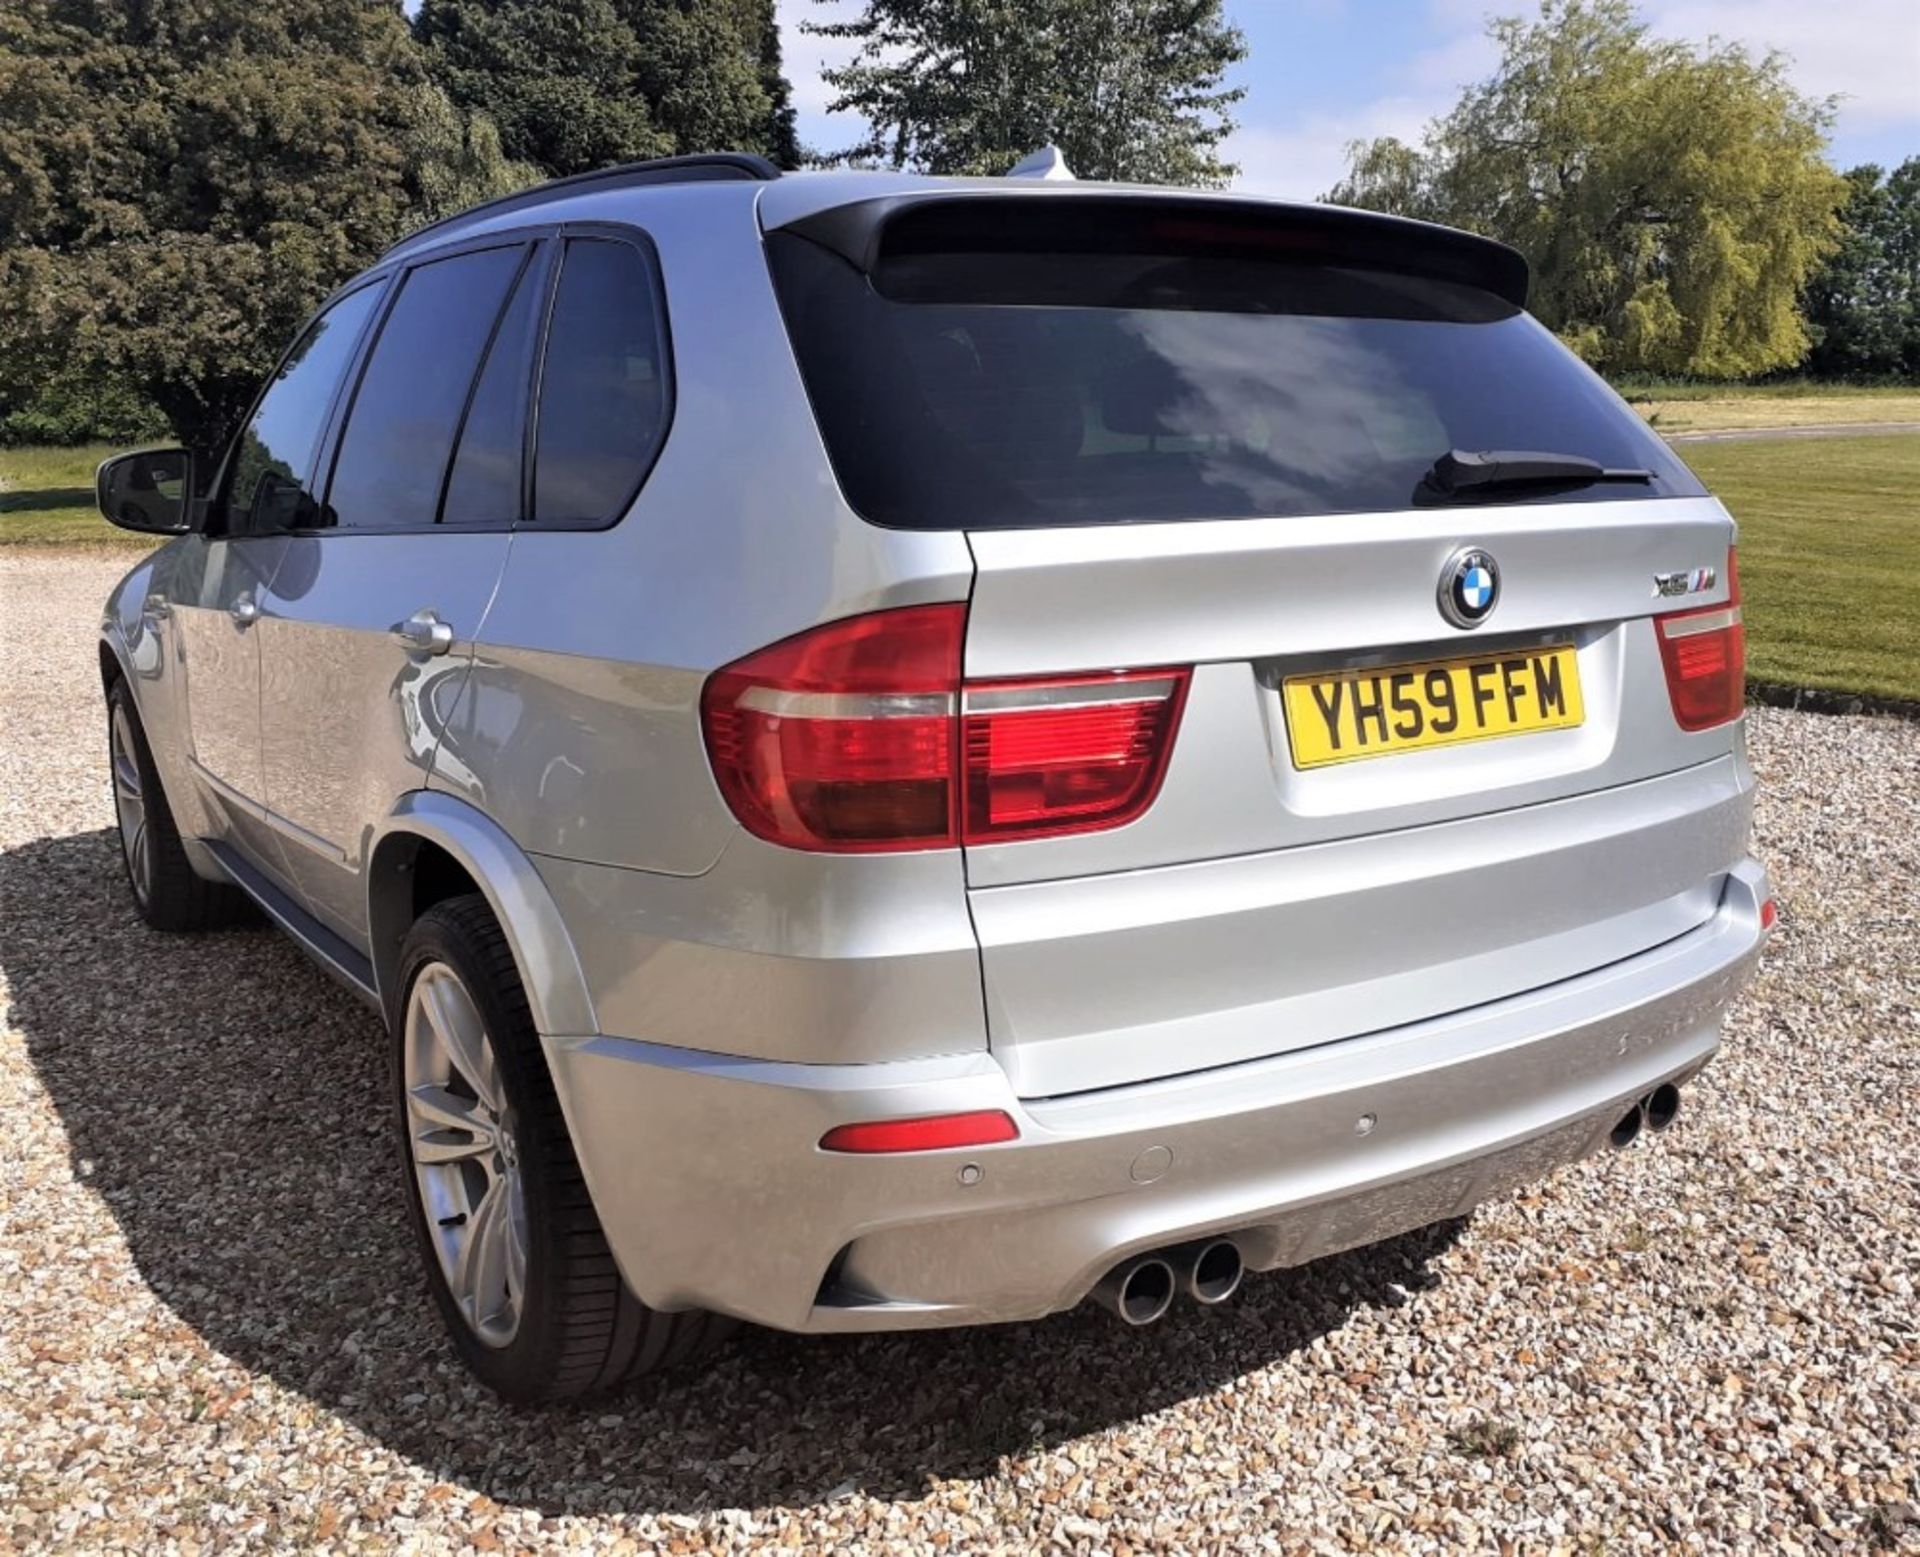 2009 BMW X5 M Registration Number:YH59 FFM Chassis Number: TBA Recorded Mileage: 125,000 miles - Two - Bild 5 aus 17